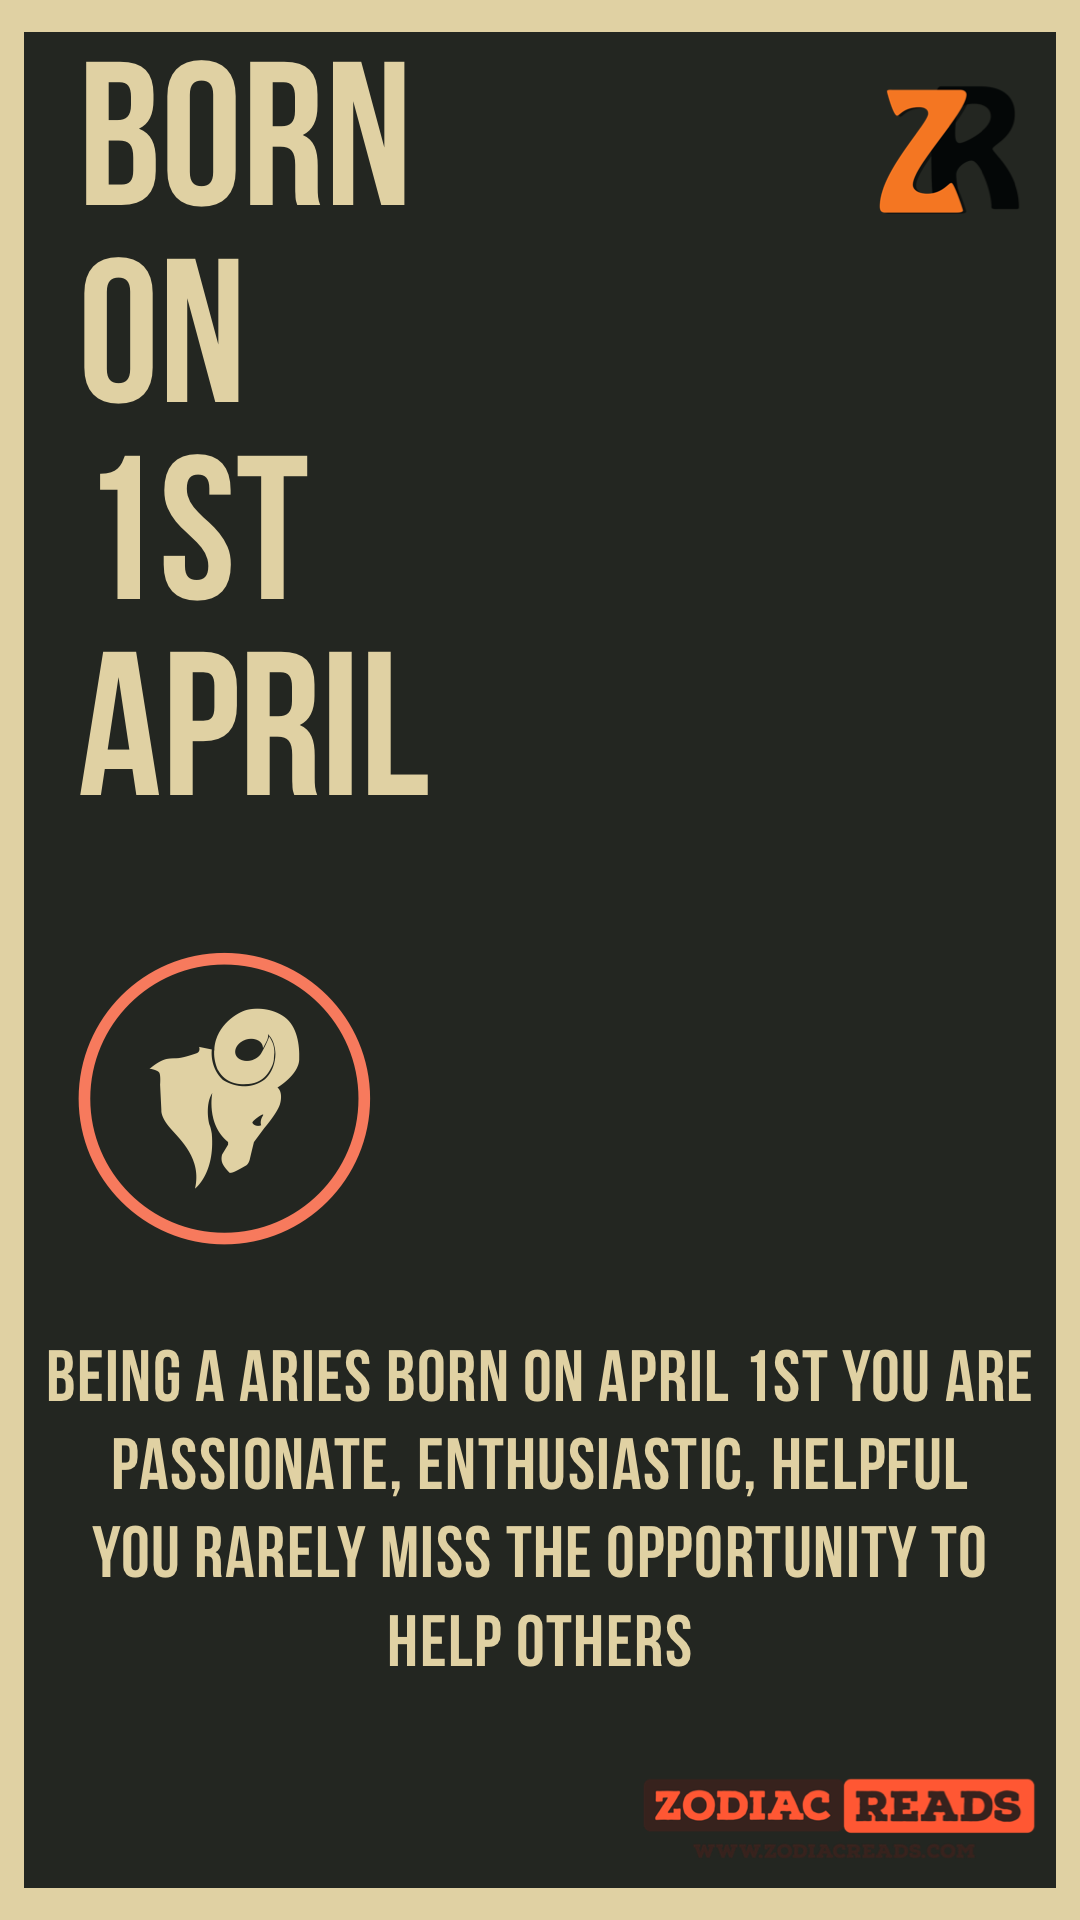 Birthday Traits of Those Born in April - ZodiacReads